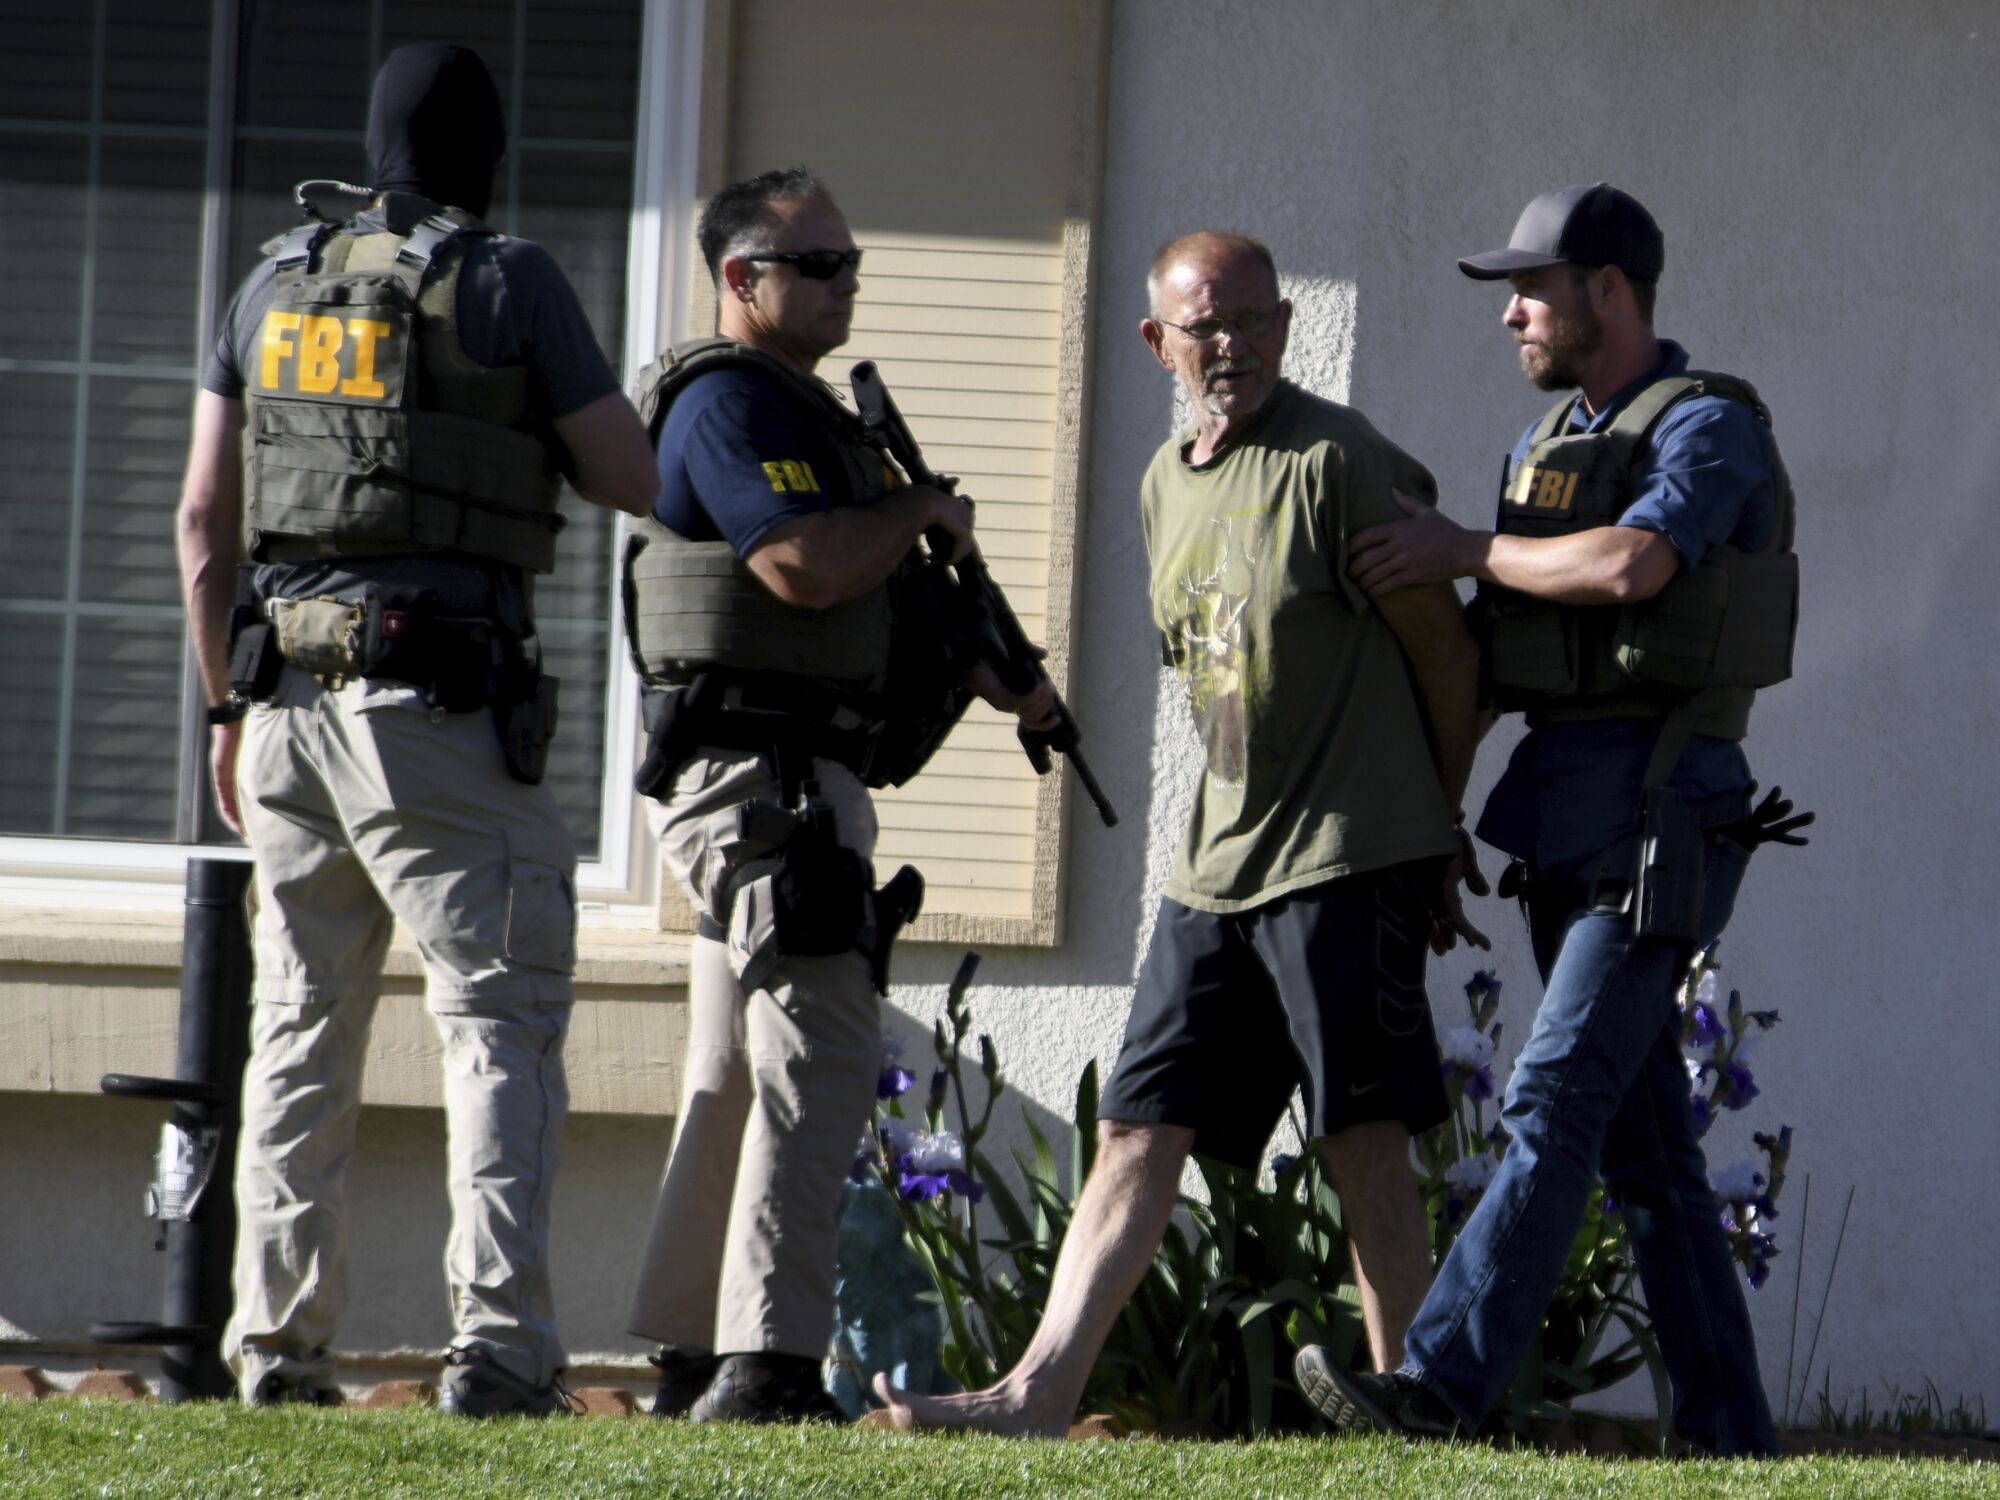 A handcuffed man is escorted by armed FBI agents